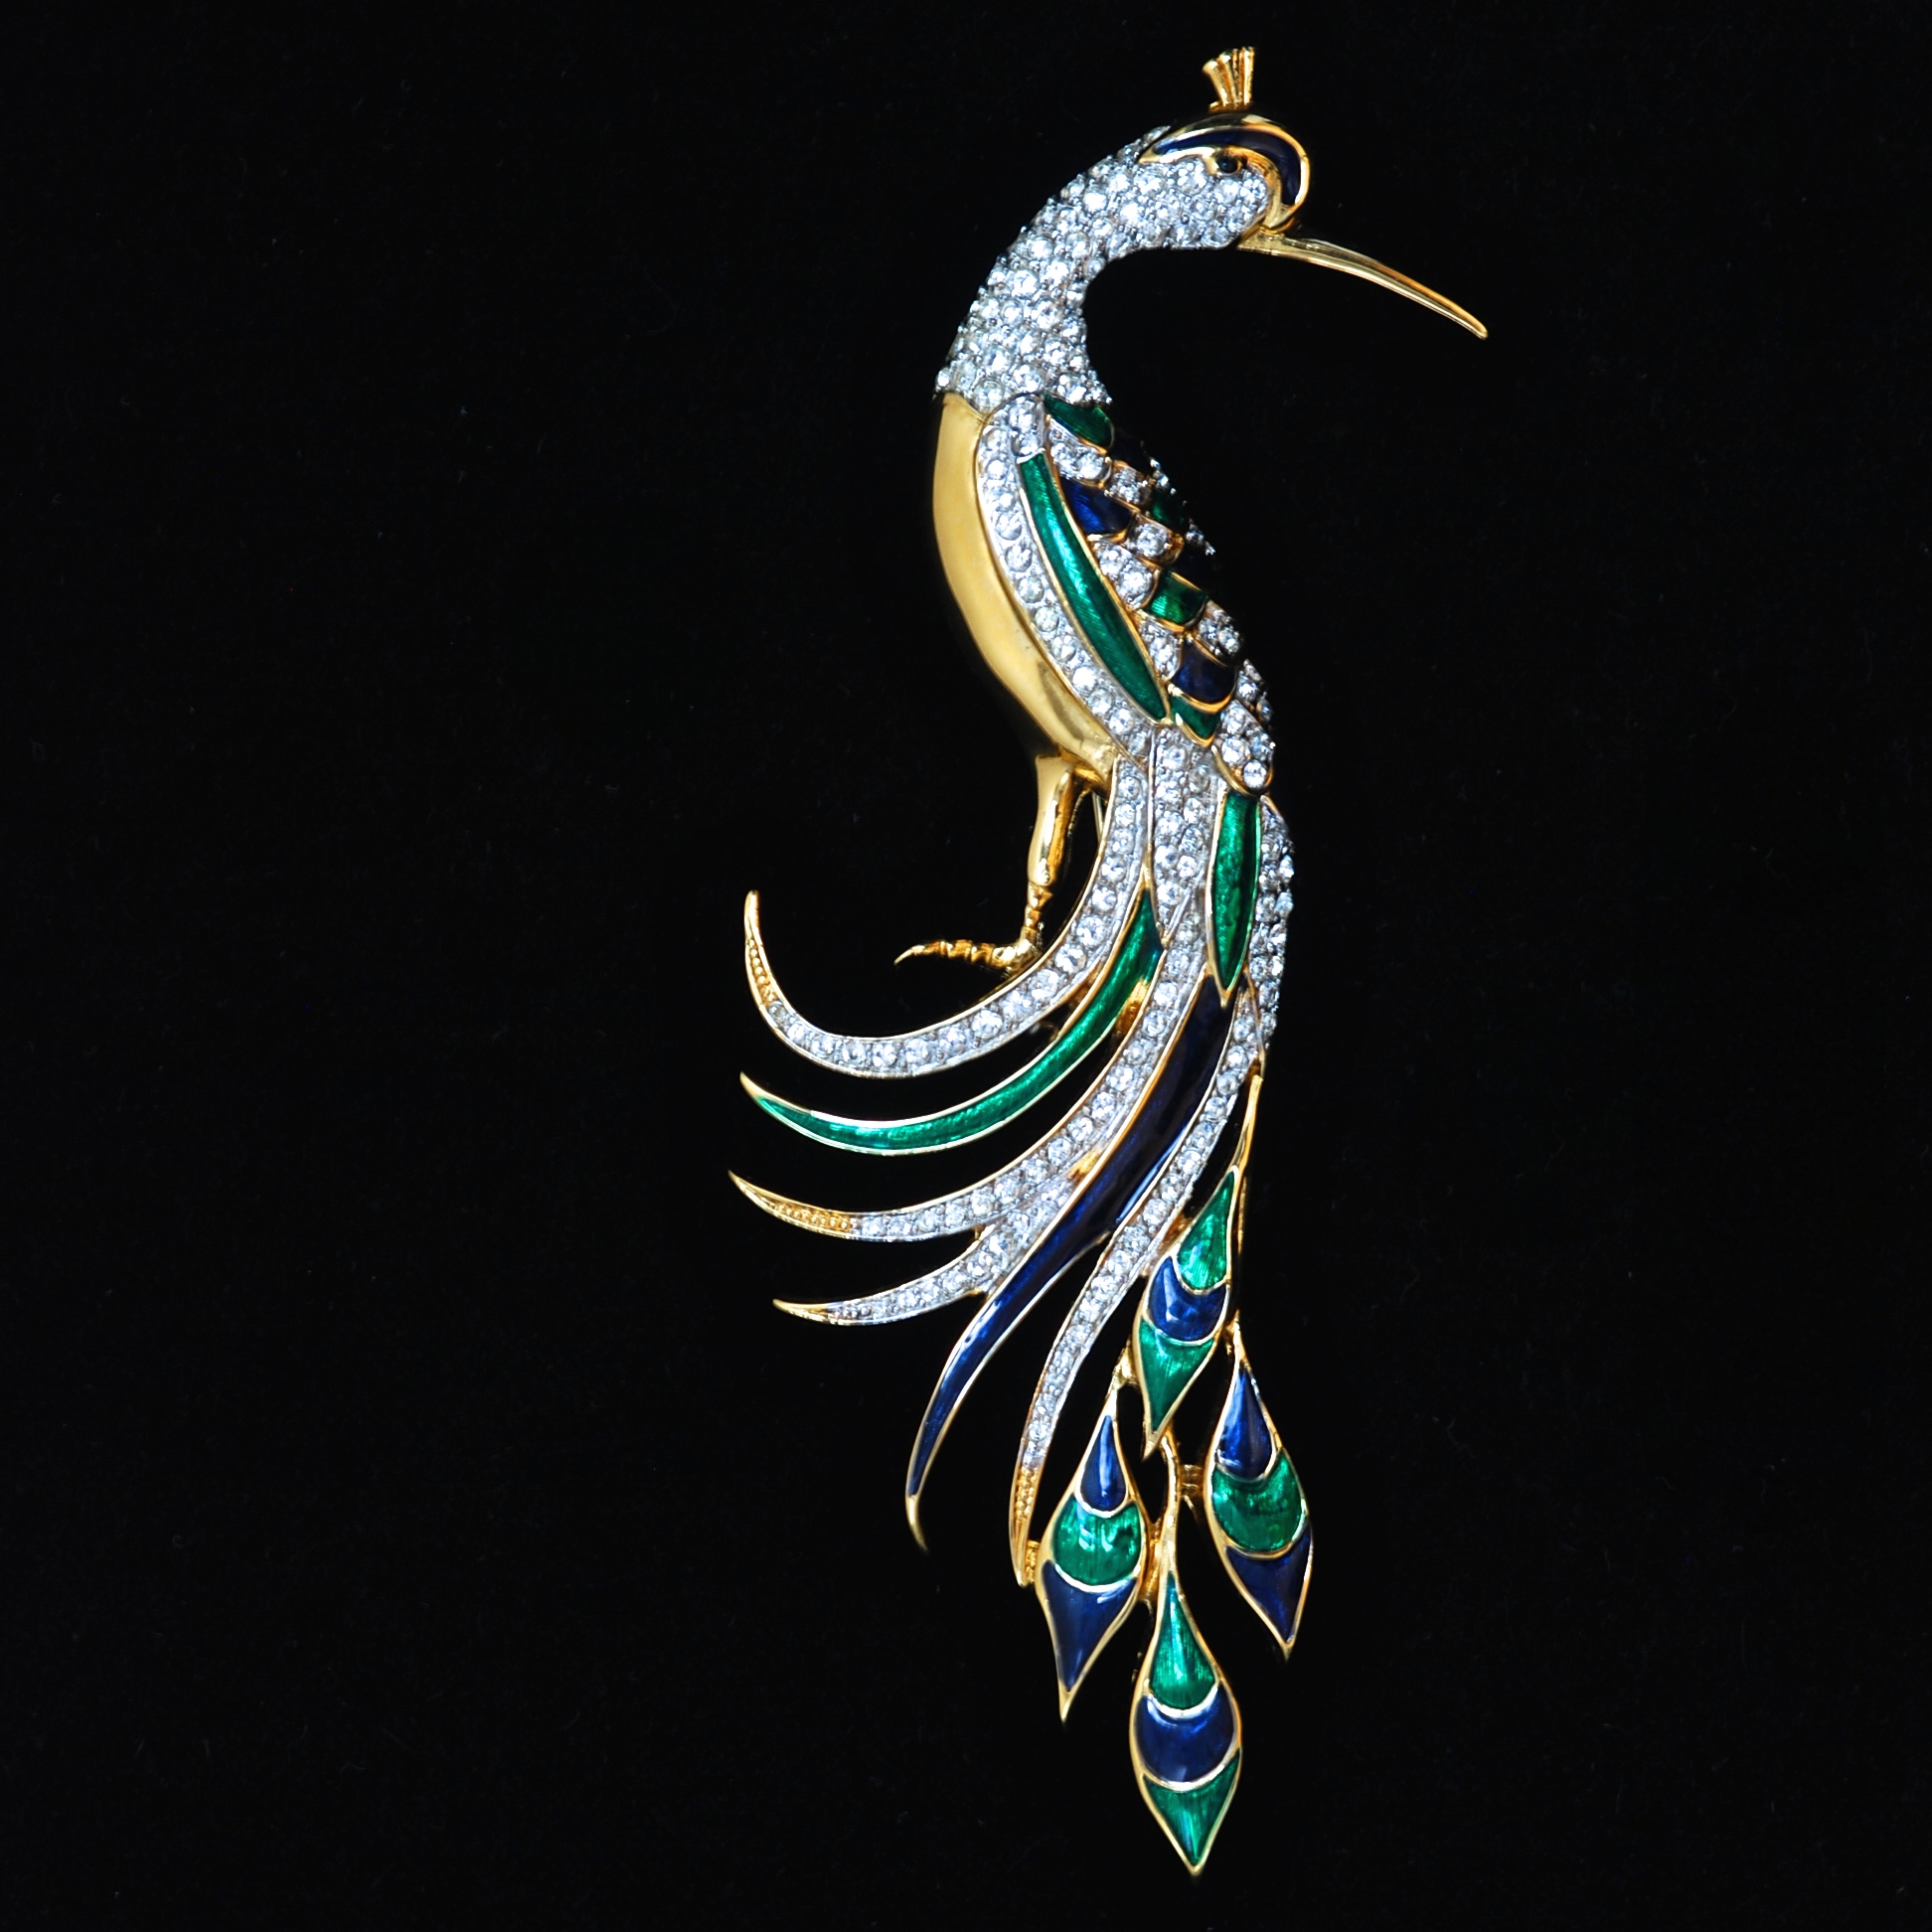 D’Orlan 5.5″ Pin Featuring A Large Peacock With Enamel & Crystal ...